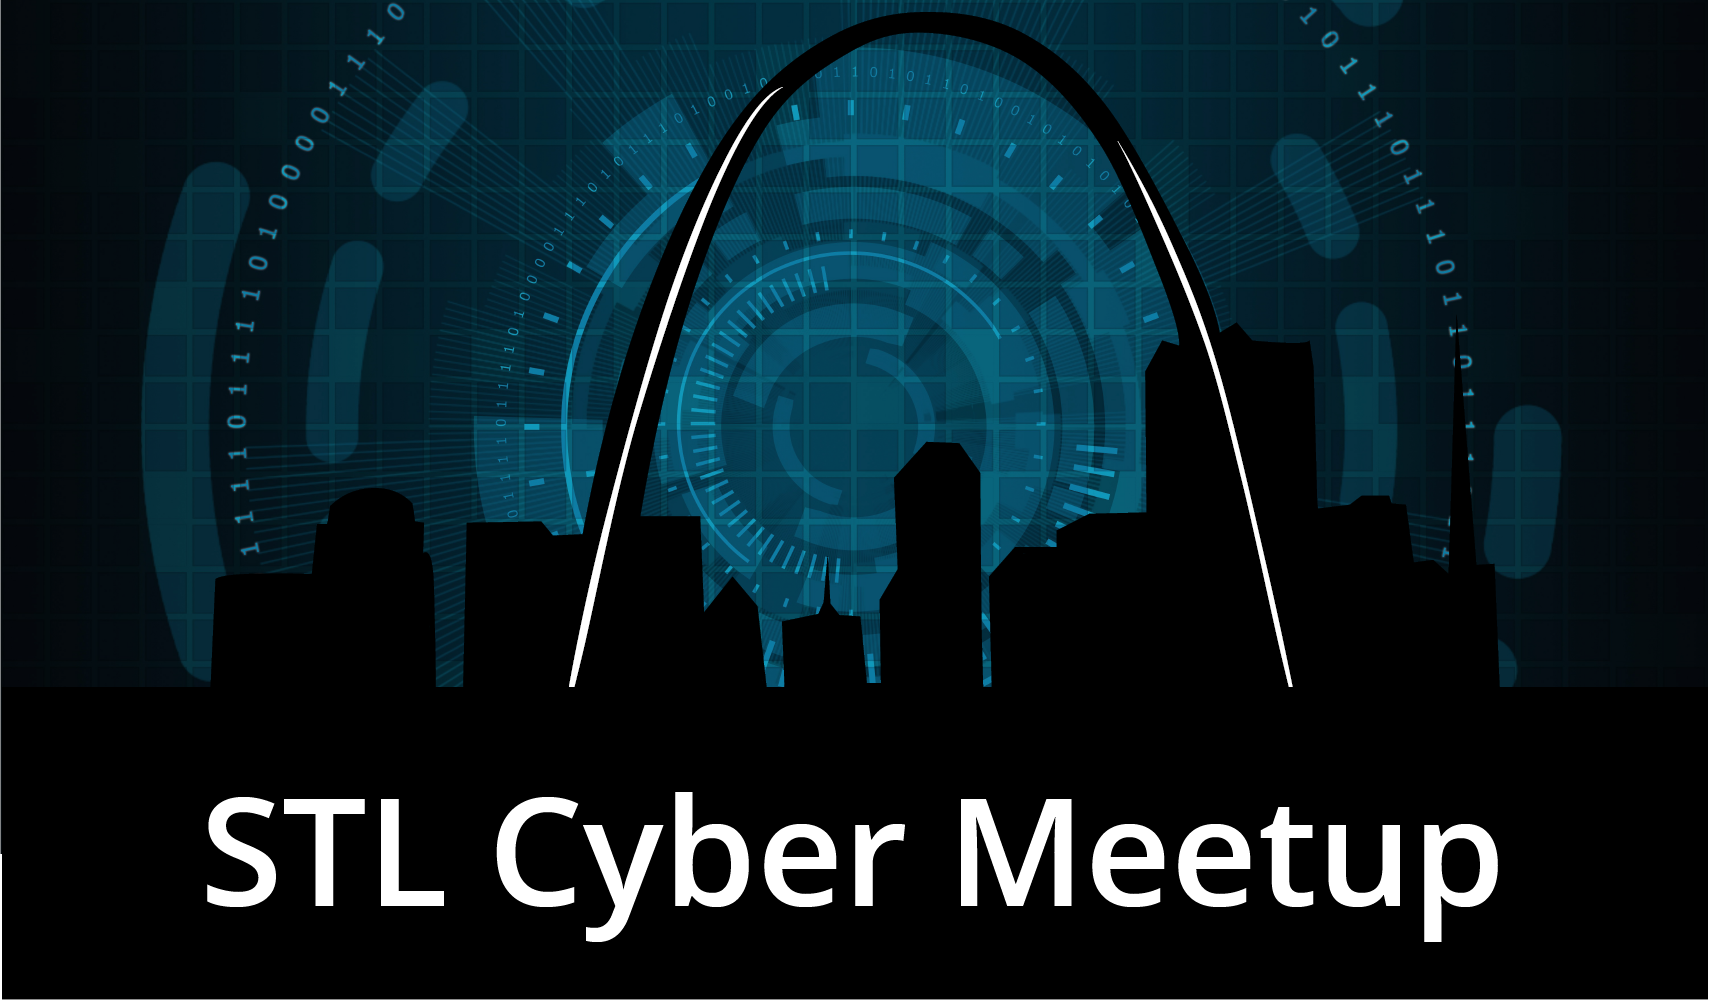 stl-cyber-meetup-with-text